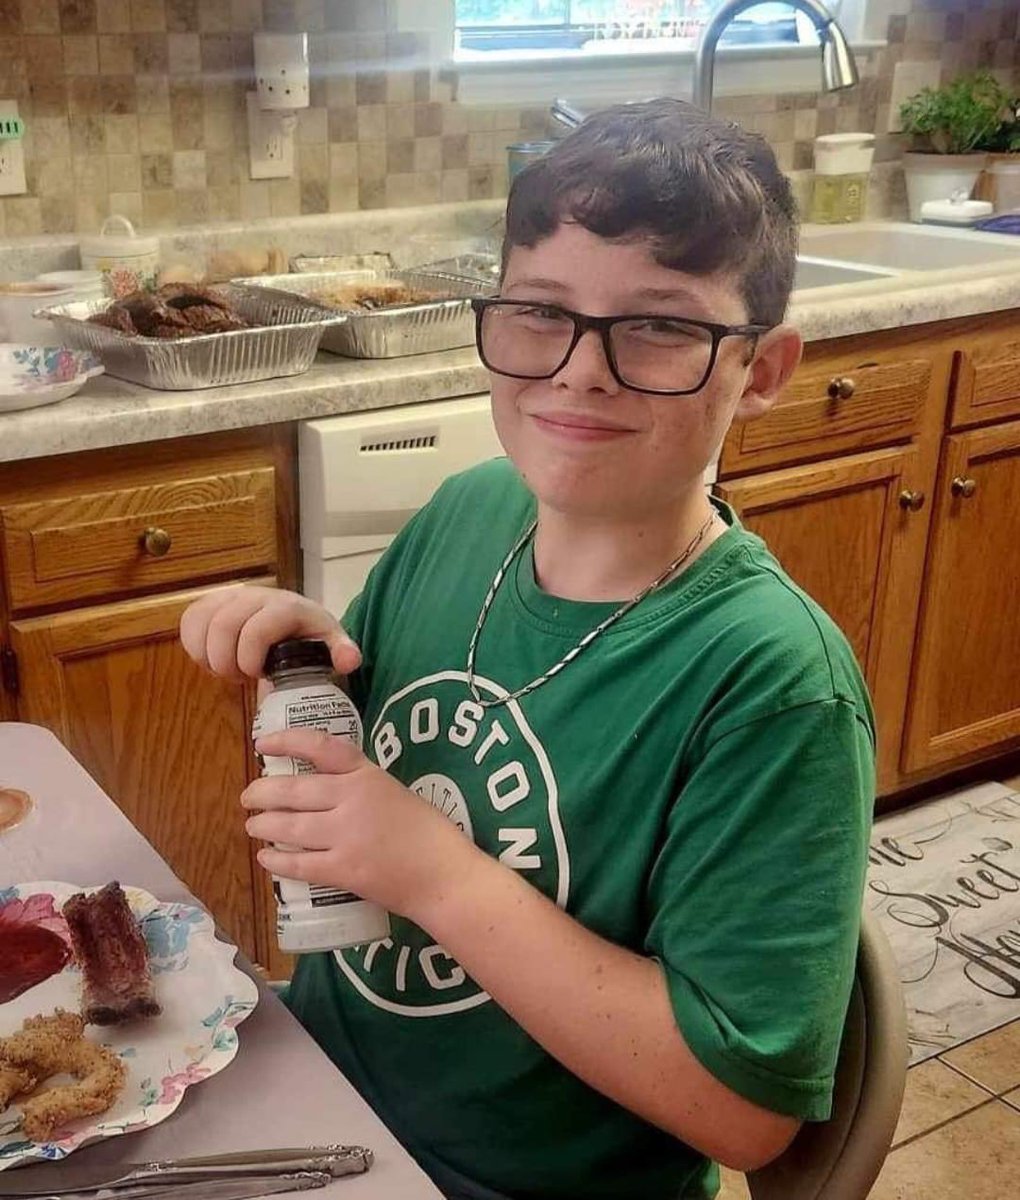 my nephew will is missing. he was last seen wearing a blue sweatshirt and shorts. he wears black framed glasses and has green eyes and brunette hair. please if you've seen him contact me or the chattanooga police department. #chattanooga #missingperson